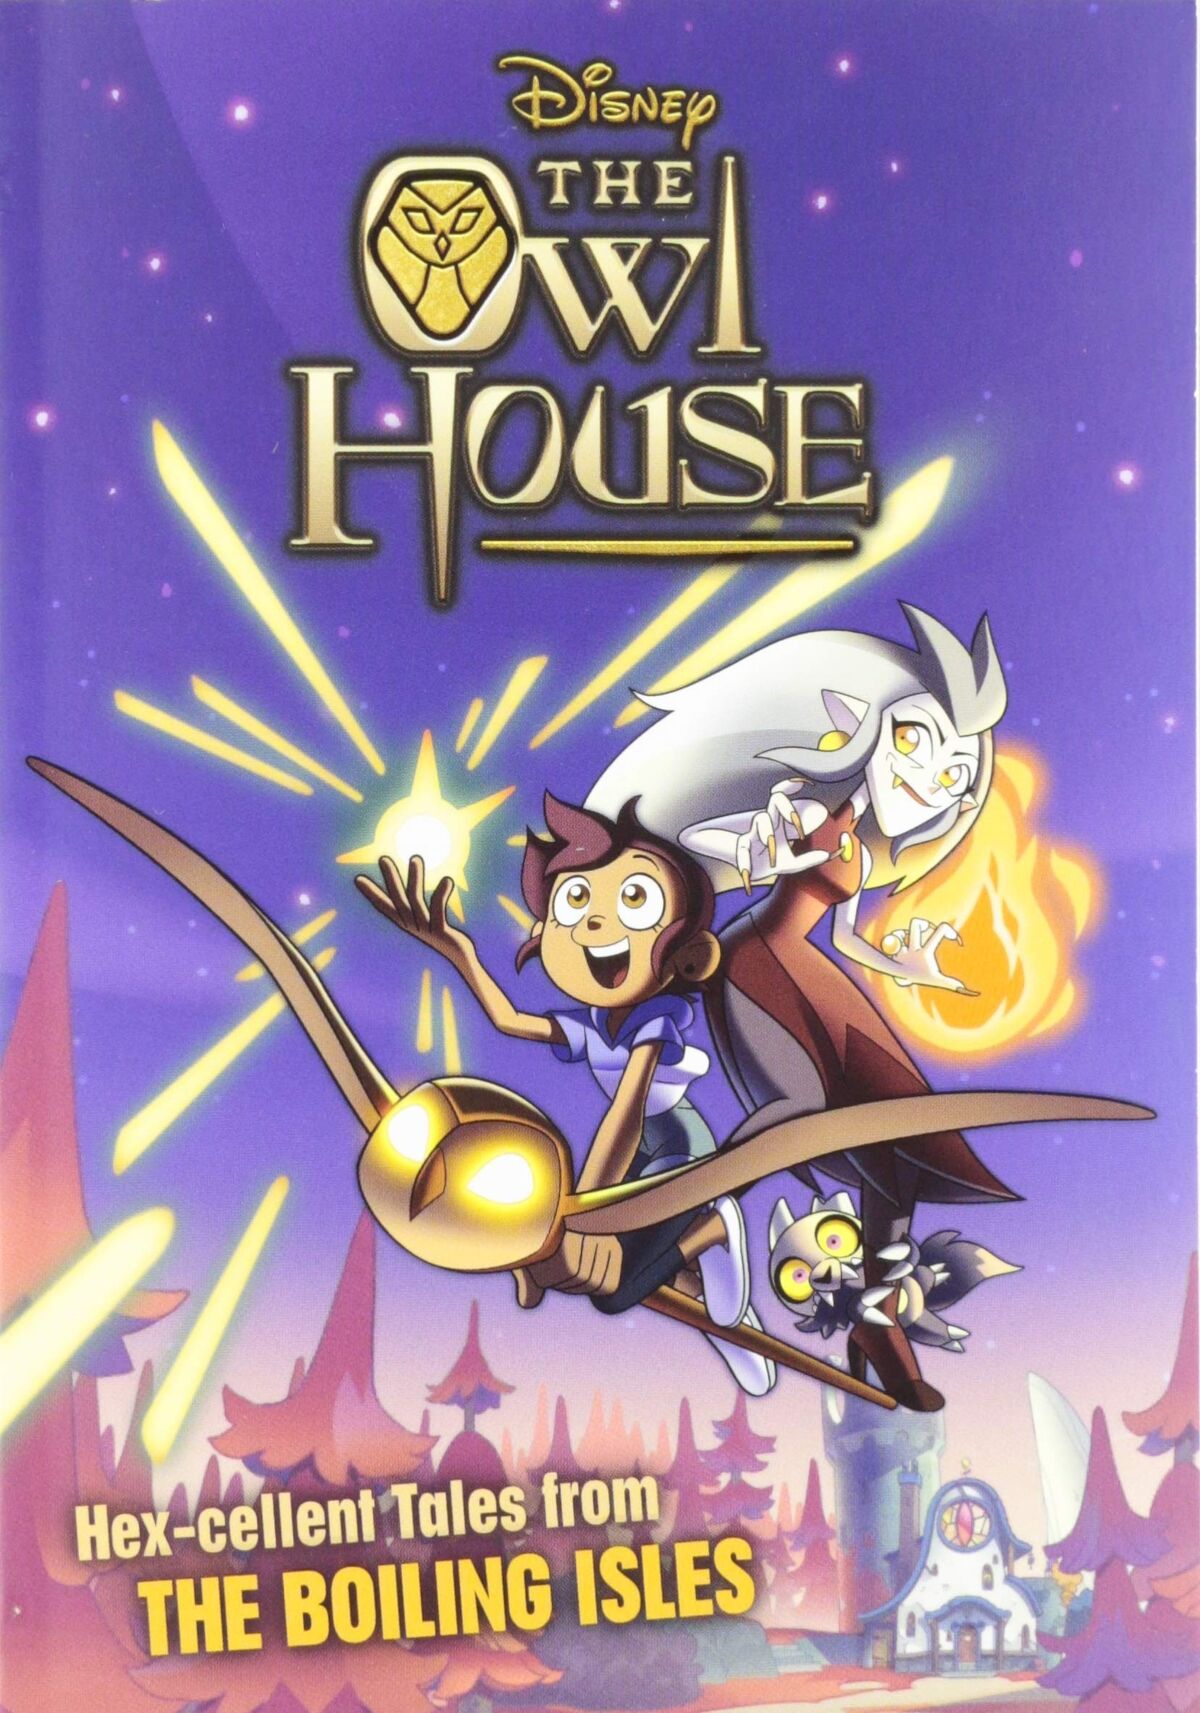 The Owl House: Hex-cellent Tales from The Boiling Isles by Disney Books, eBook